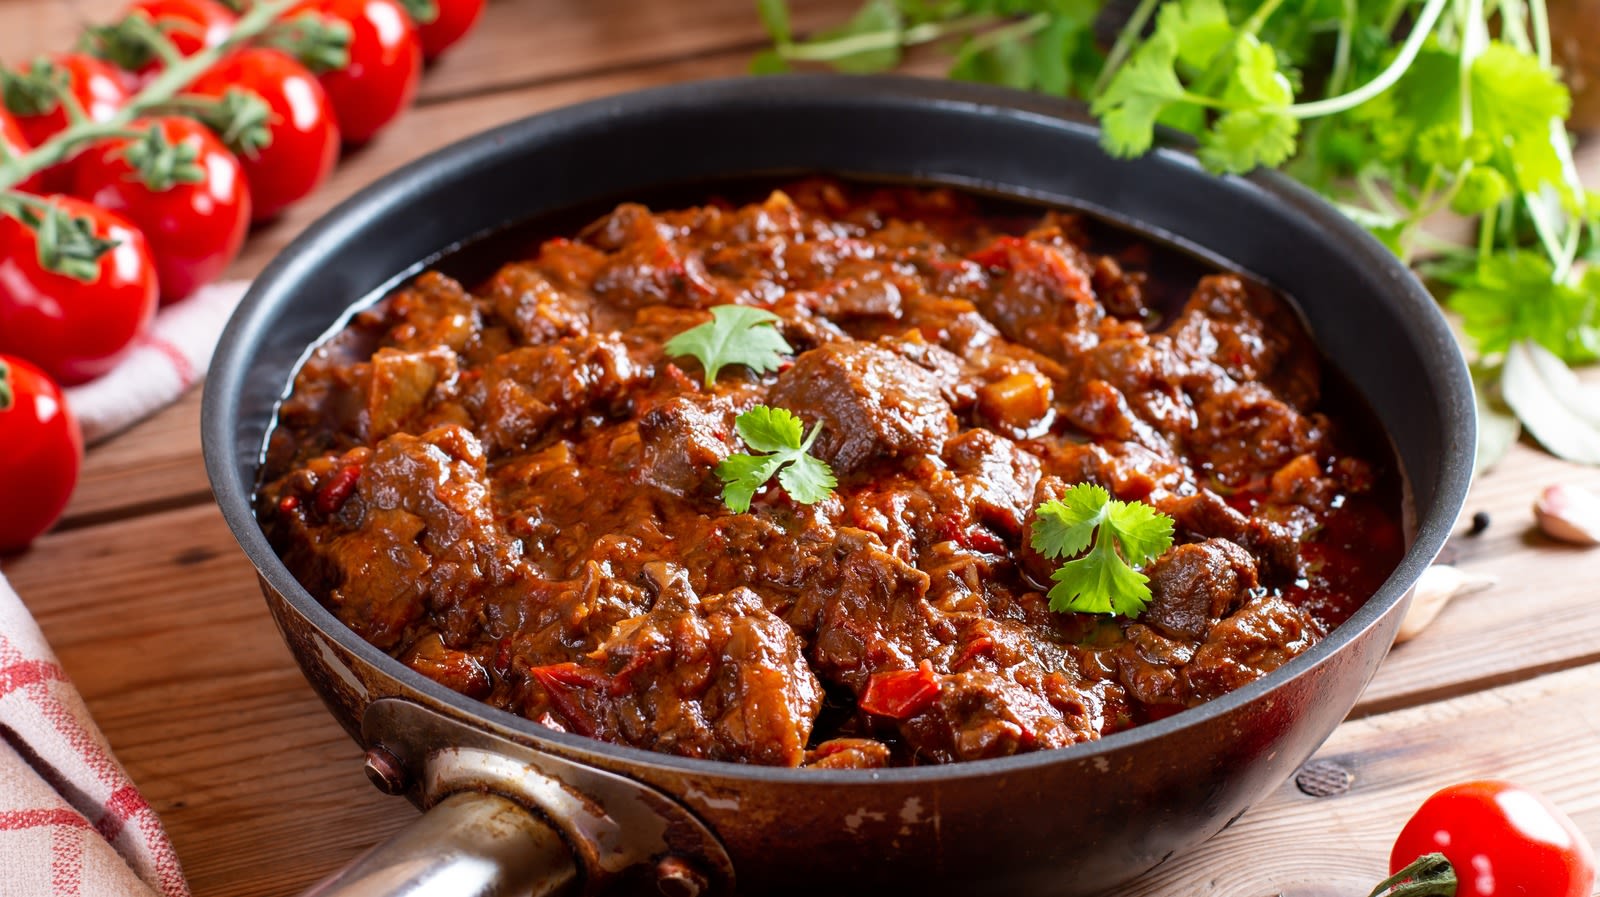 The History Of Beef Stew Can Be Traced Back To 14th Century France